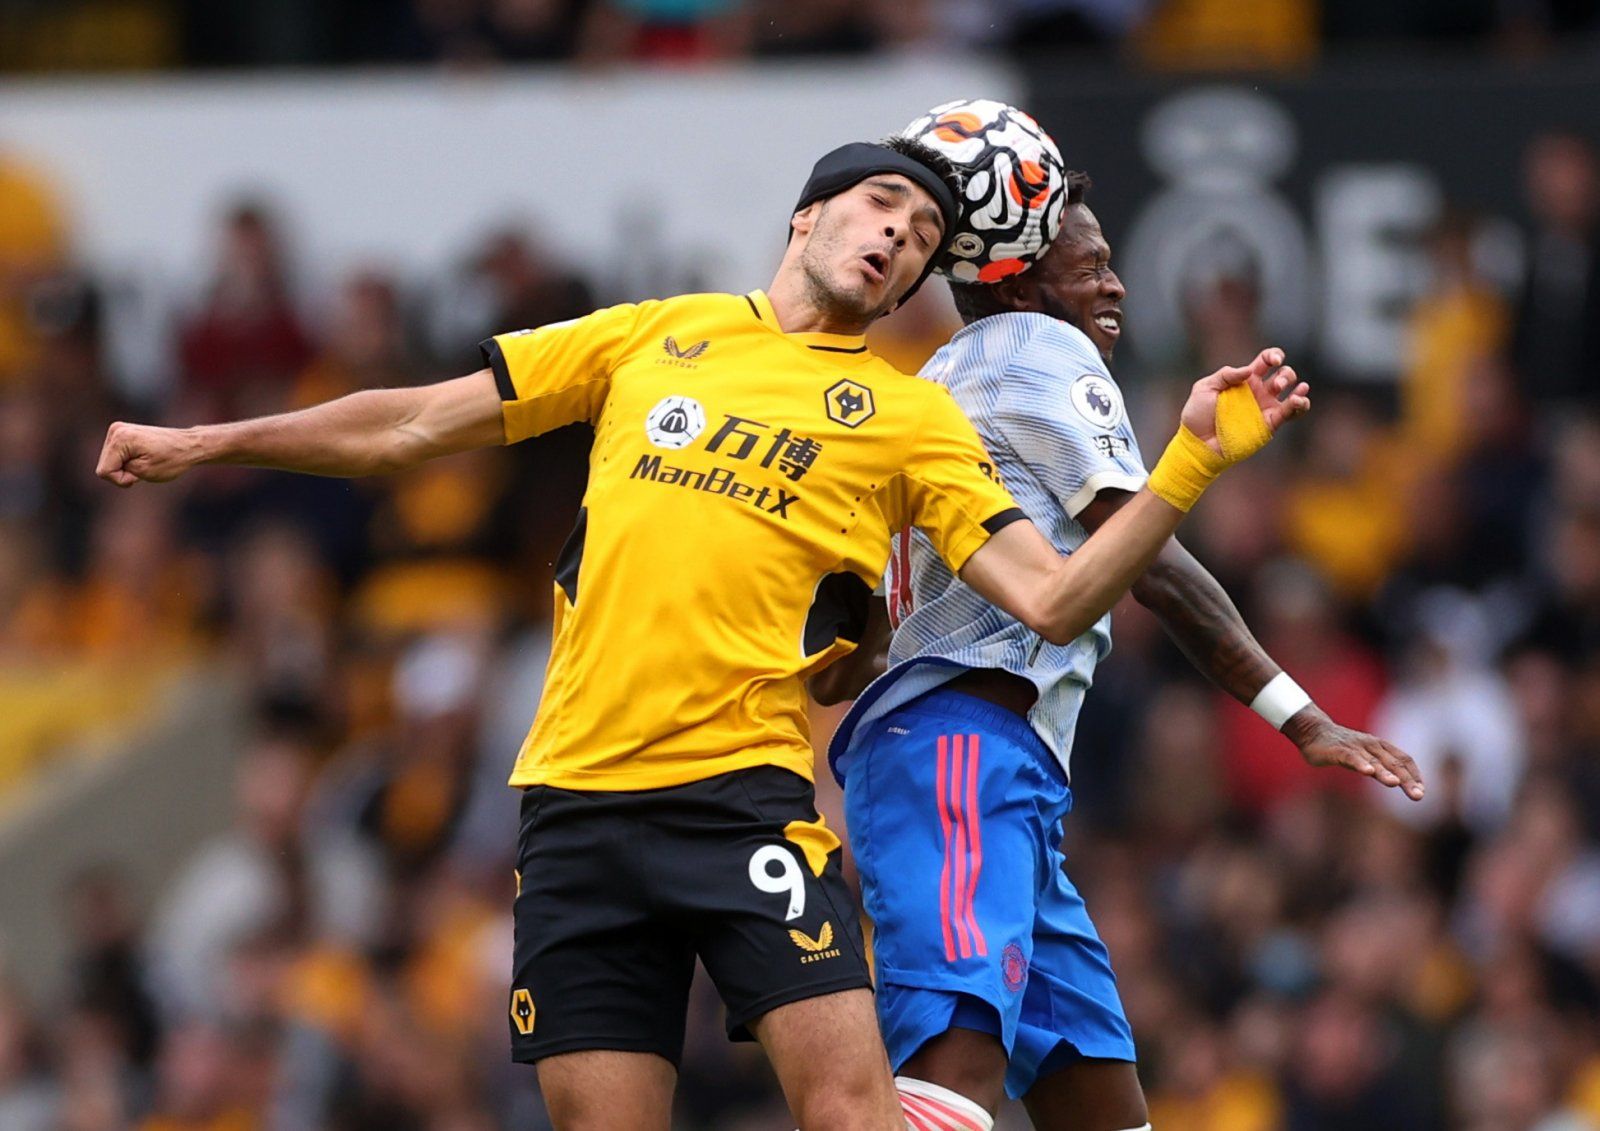 Wolves: Lage won’t rush to bring in striker after Jimenez injury -Wolves News